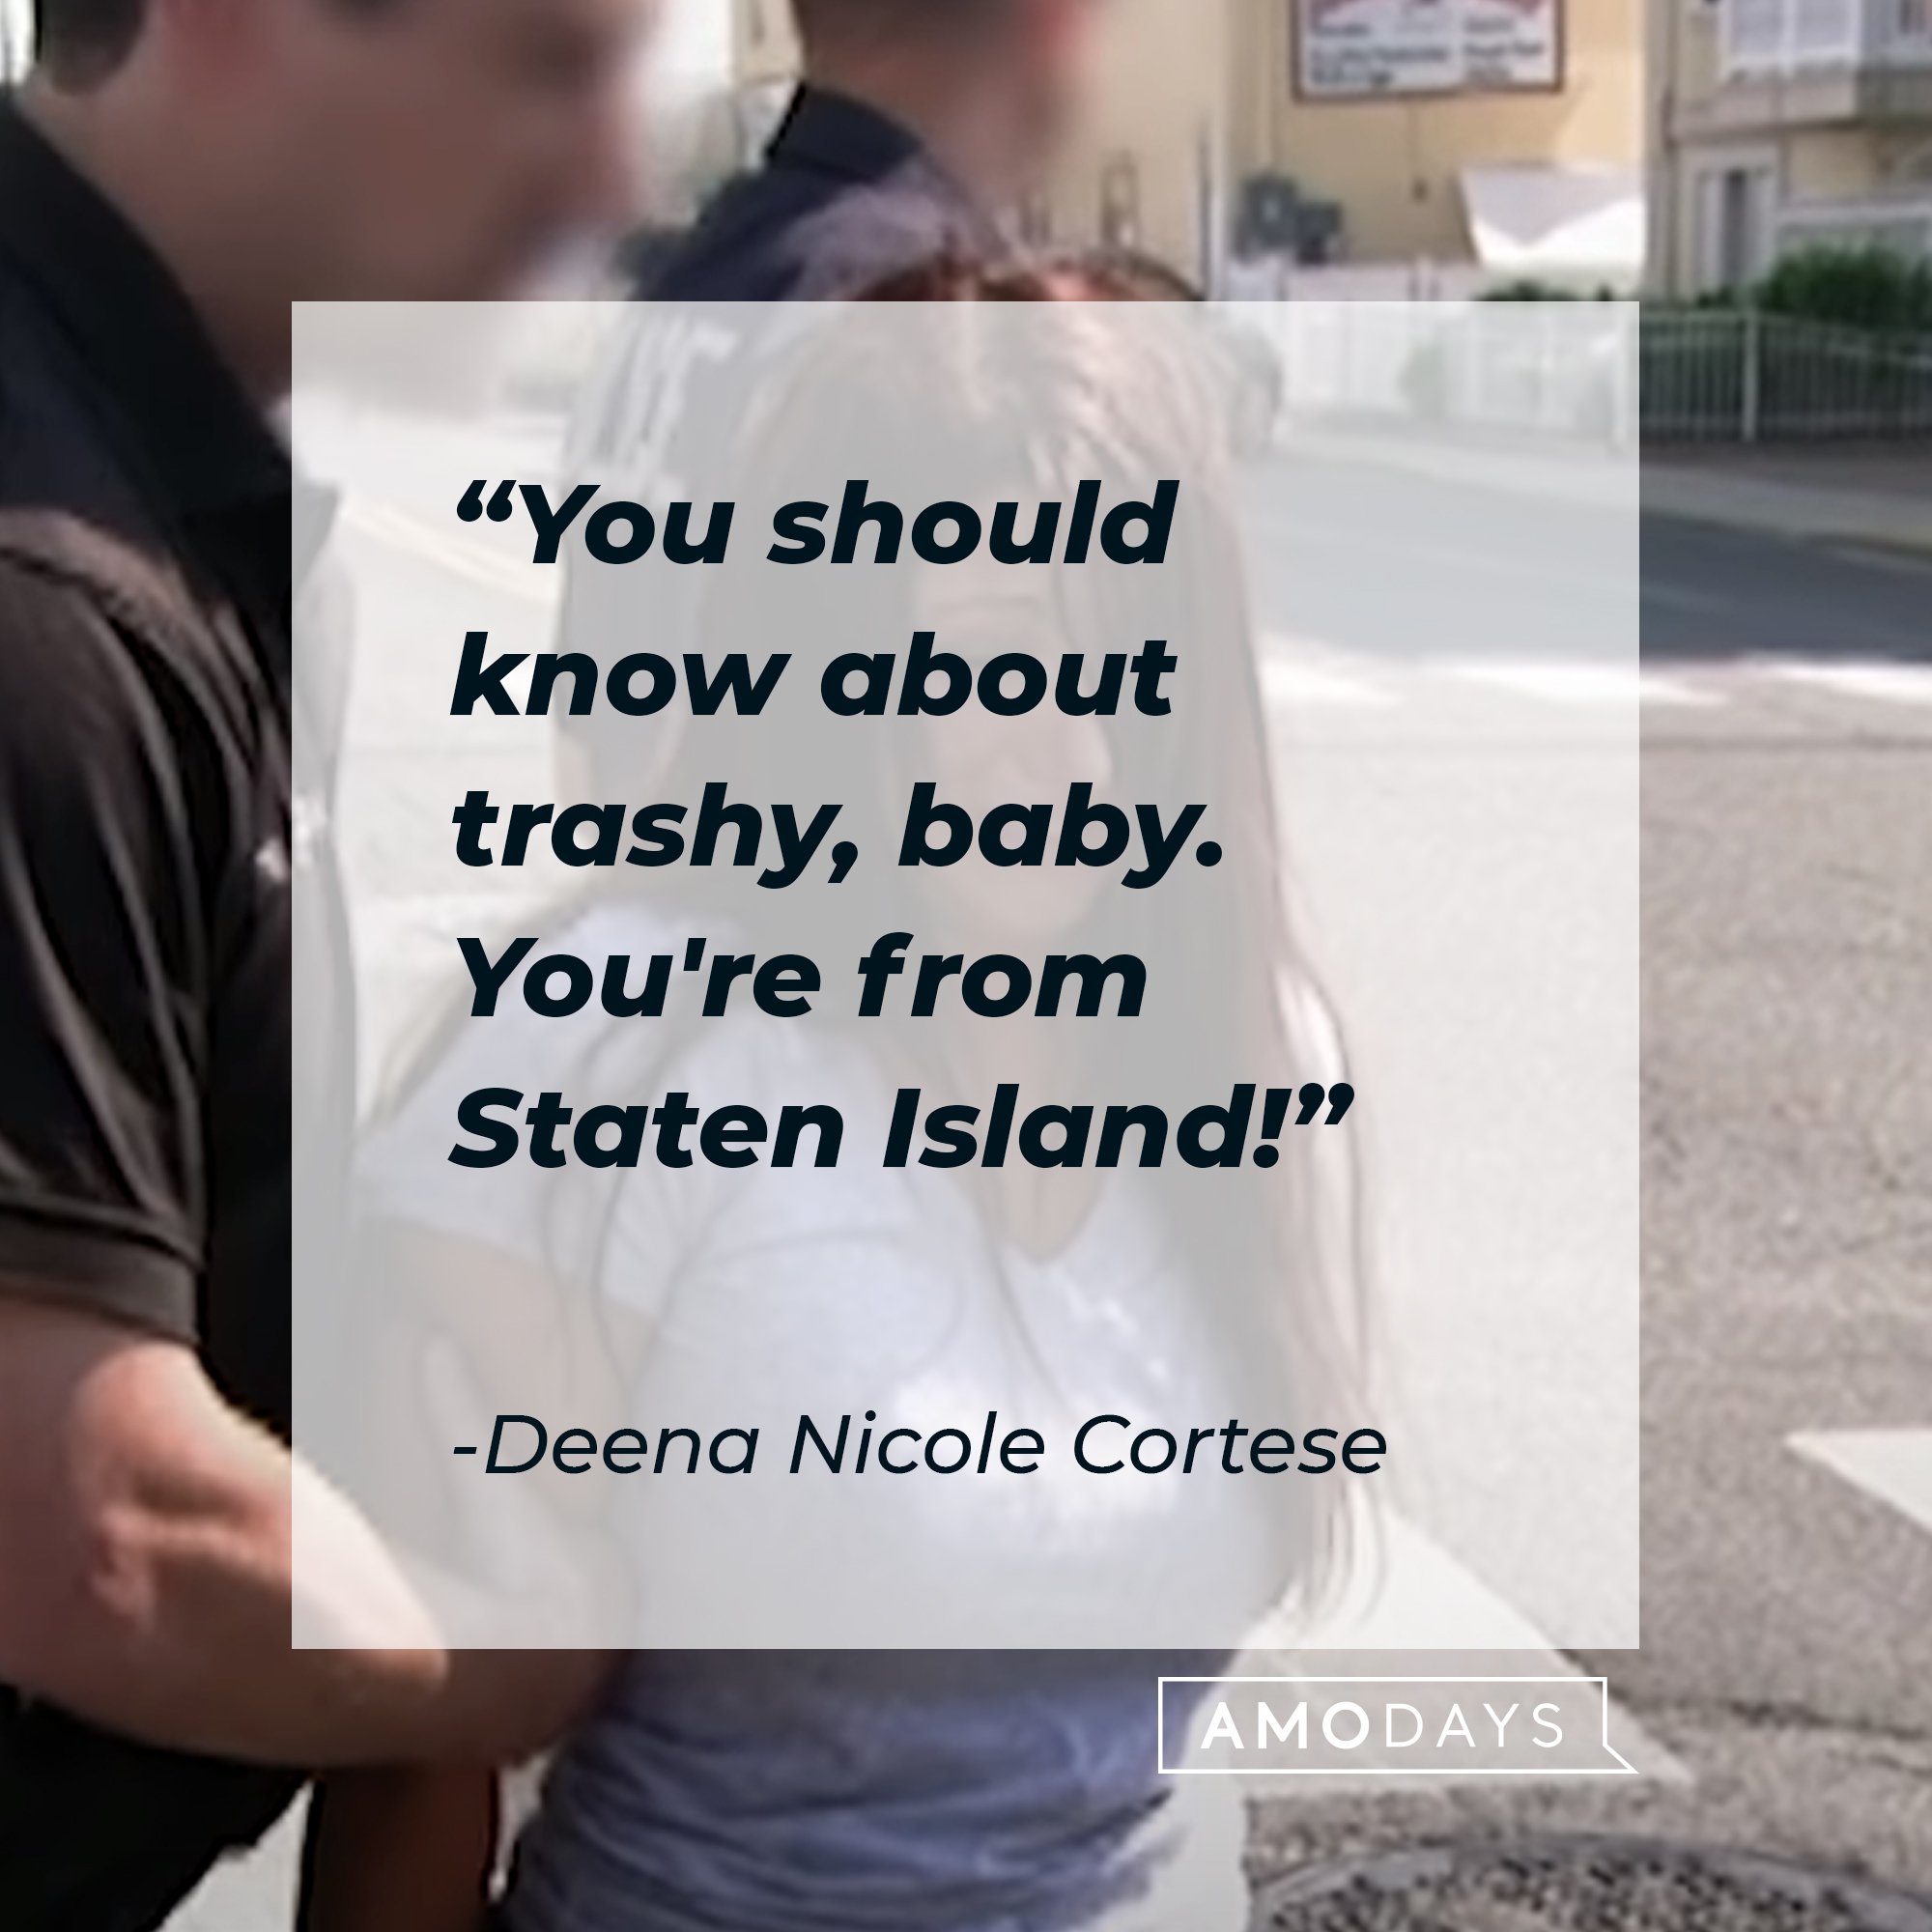 Deena Nicole Cortese‘s quote: "You should know about trashy, baby. You're from Staten Island!" | Image: AmoDays